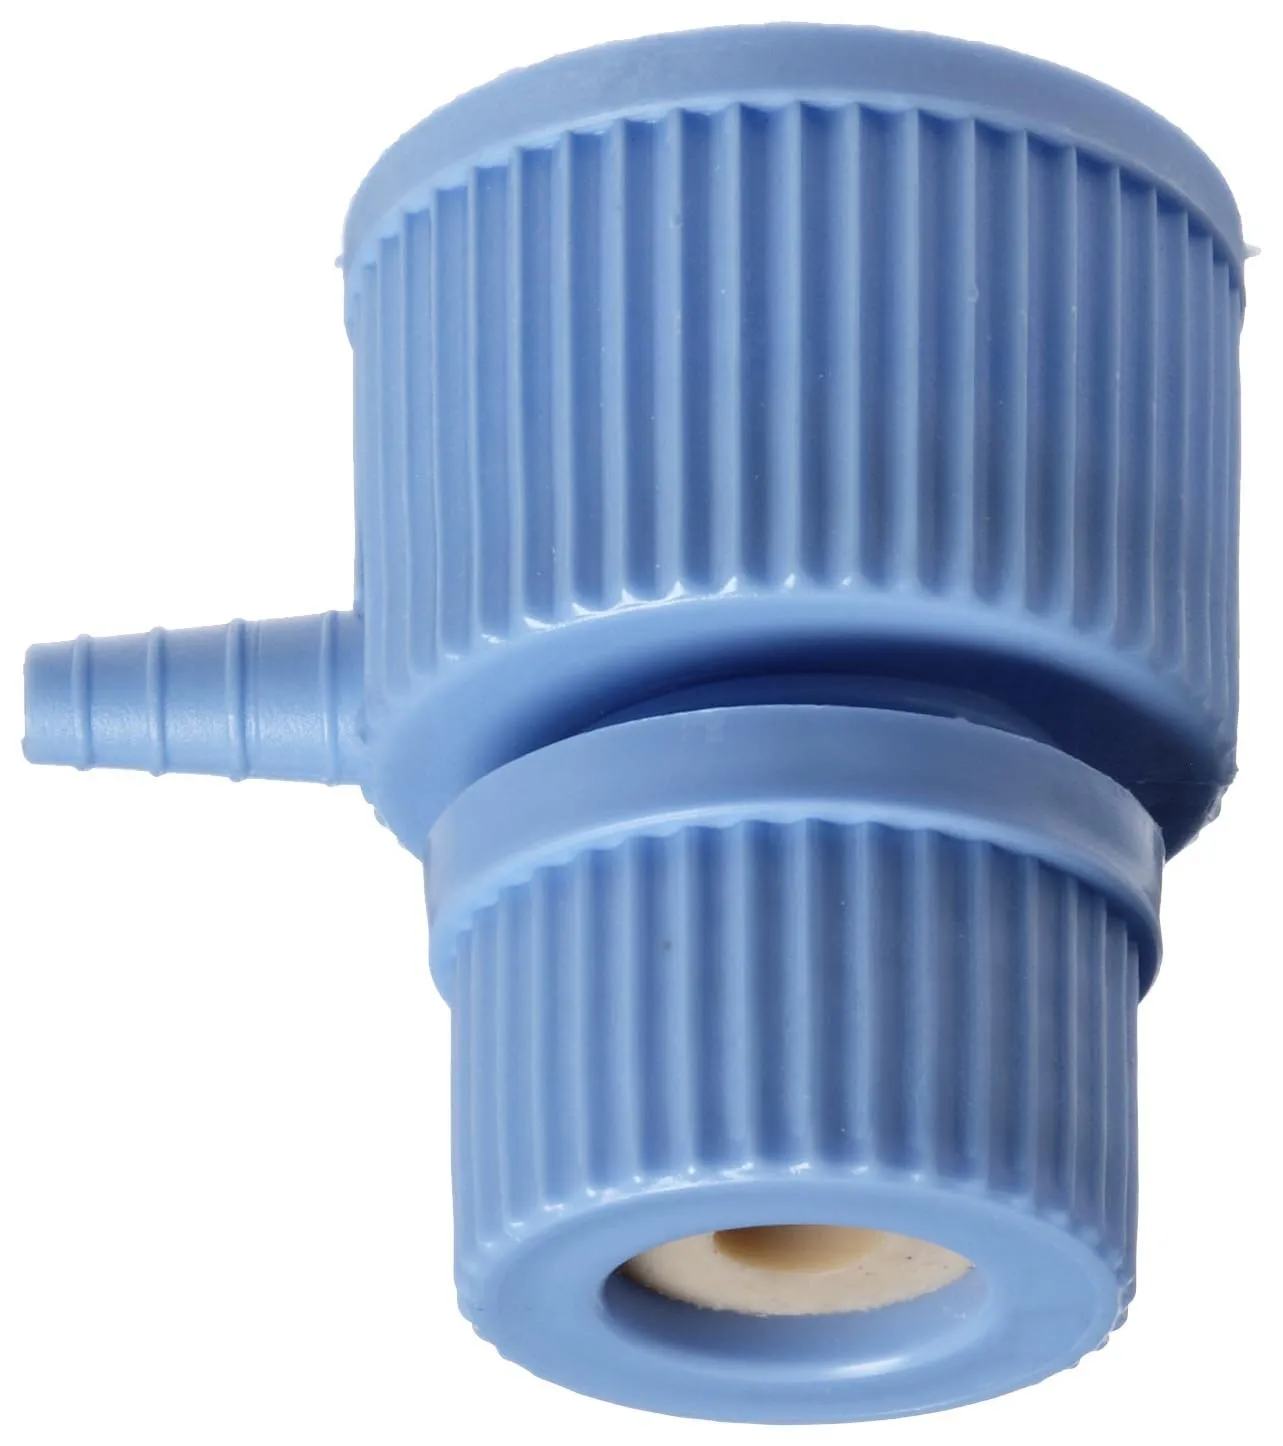 Ge Healthcare - 10445708 - Multiple Filtration Apparatus, Three-Place Filtration, Suction Cup, AS003/0/05